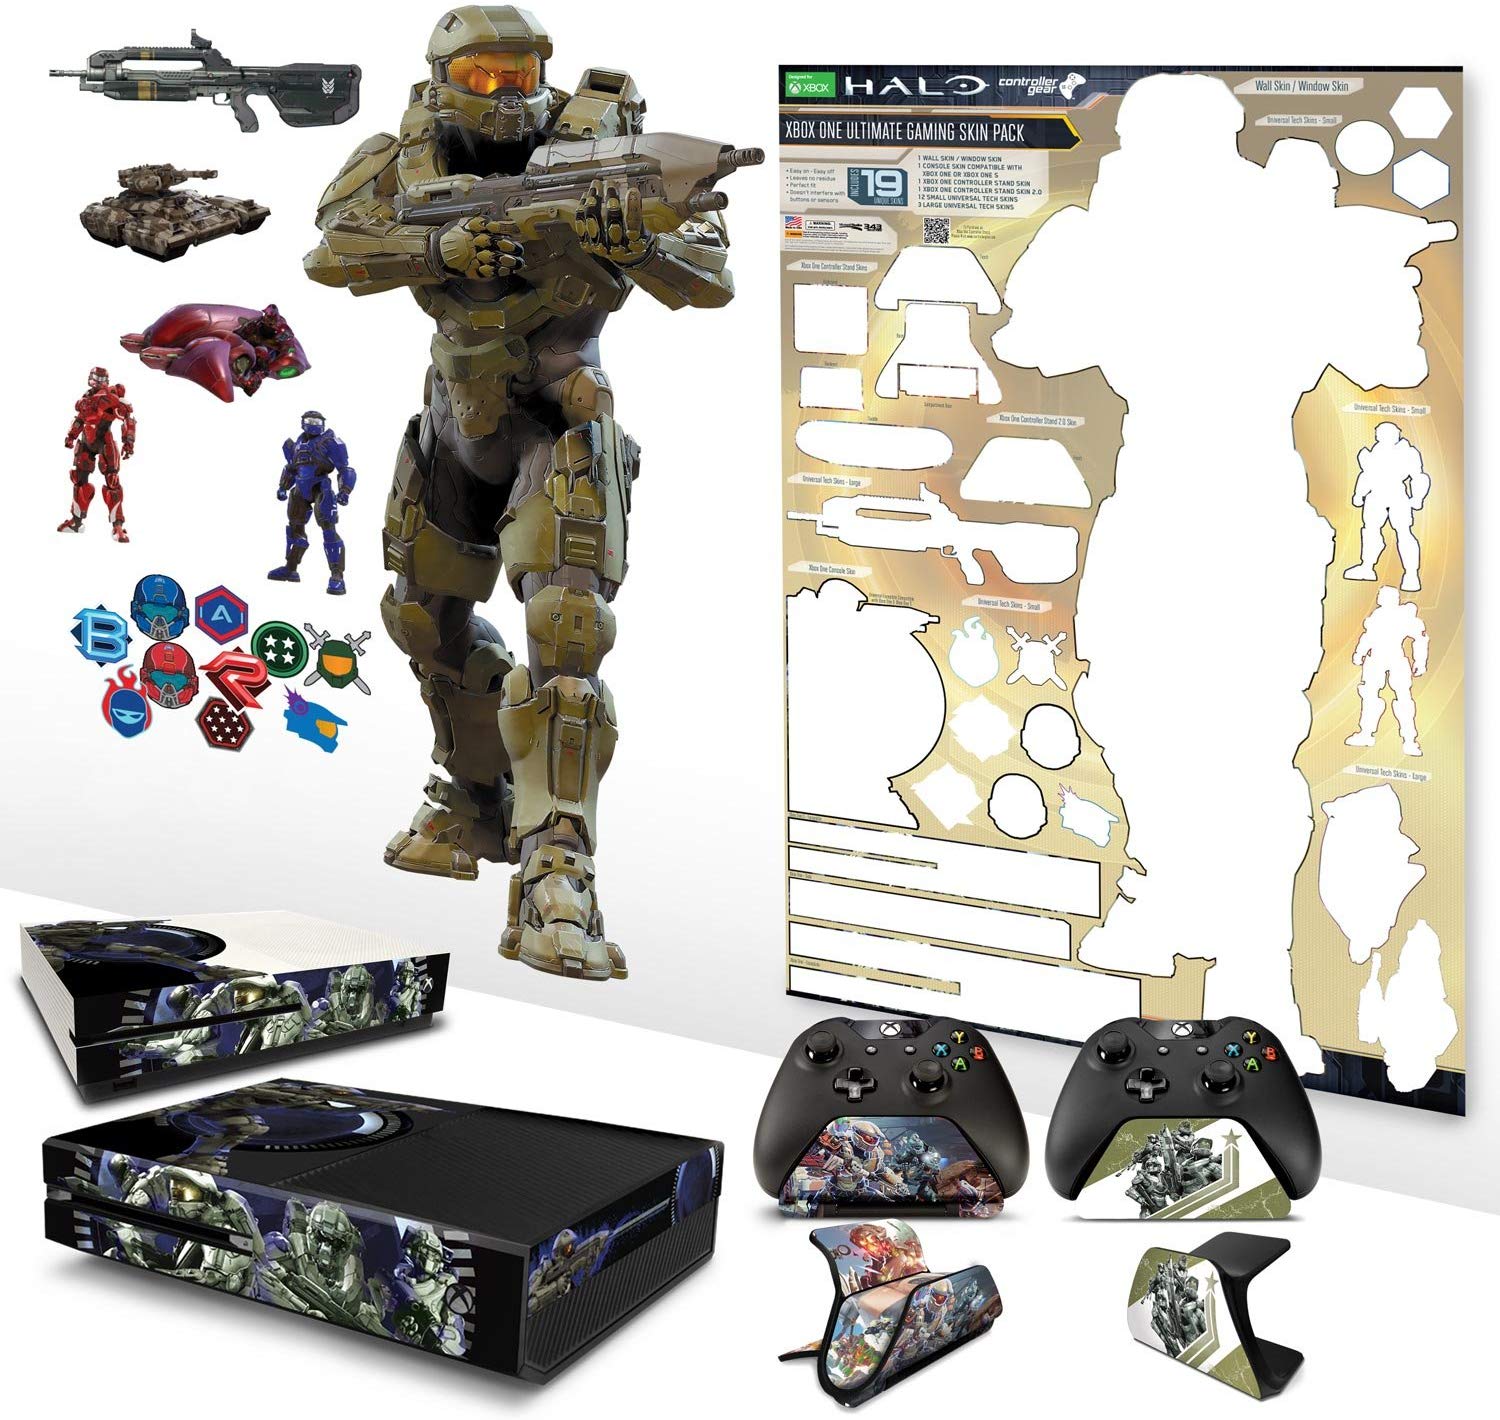 Controller Gear Halo 5 Ultimate Gaming Skin Pack - Officially Licensed by Microsoft - Xbox One